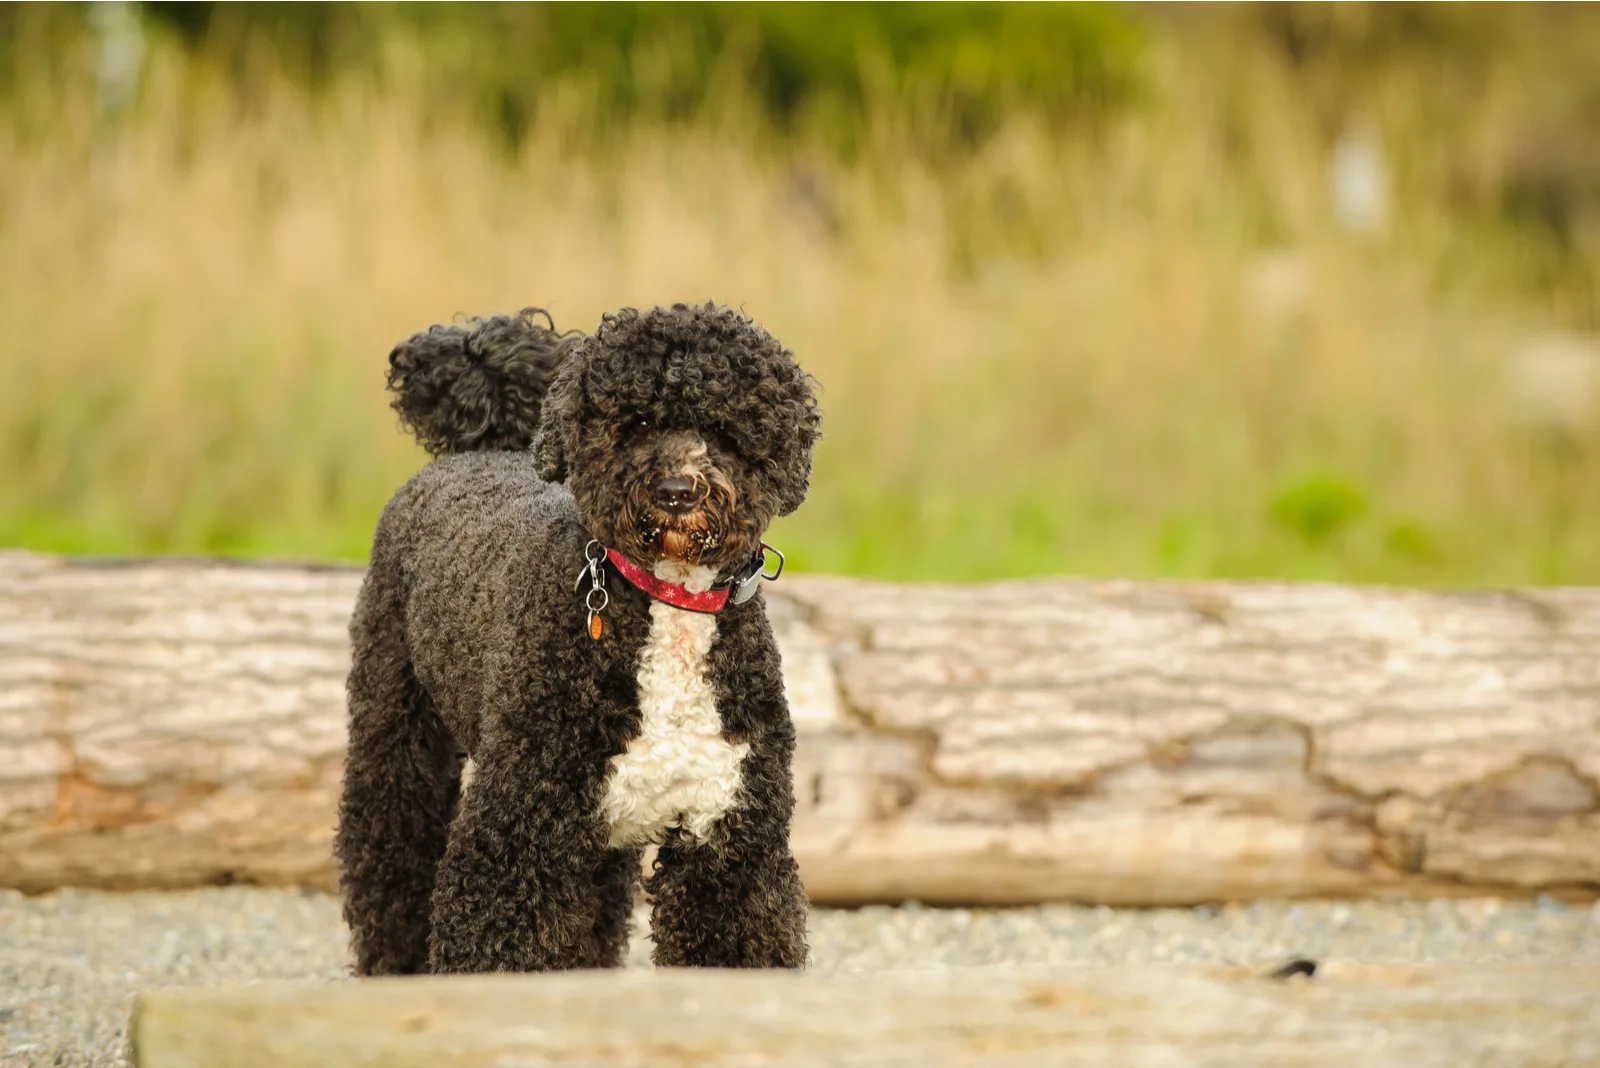 Portuguese Water Dog standing in nature